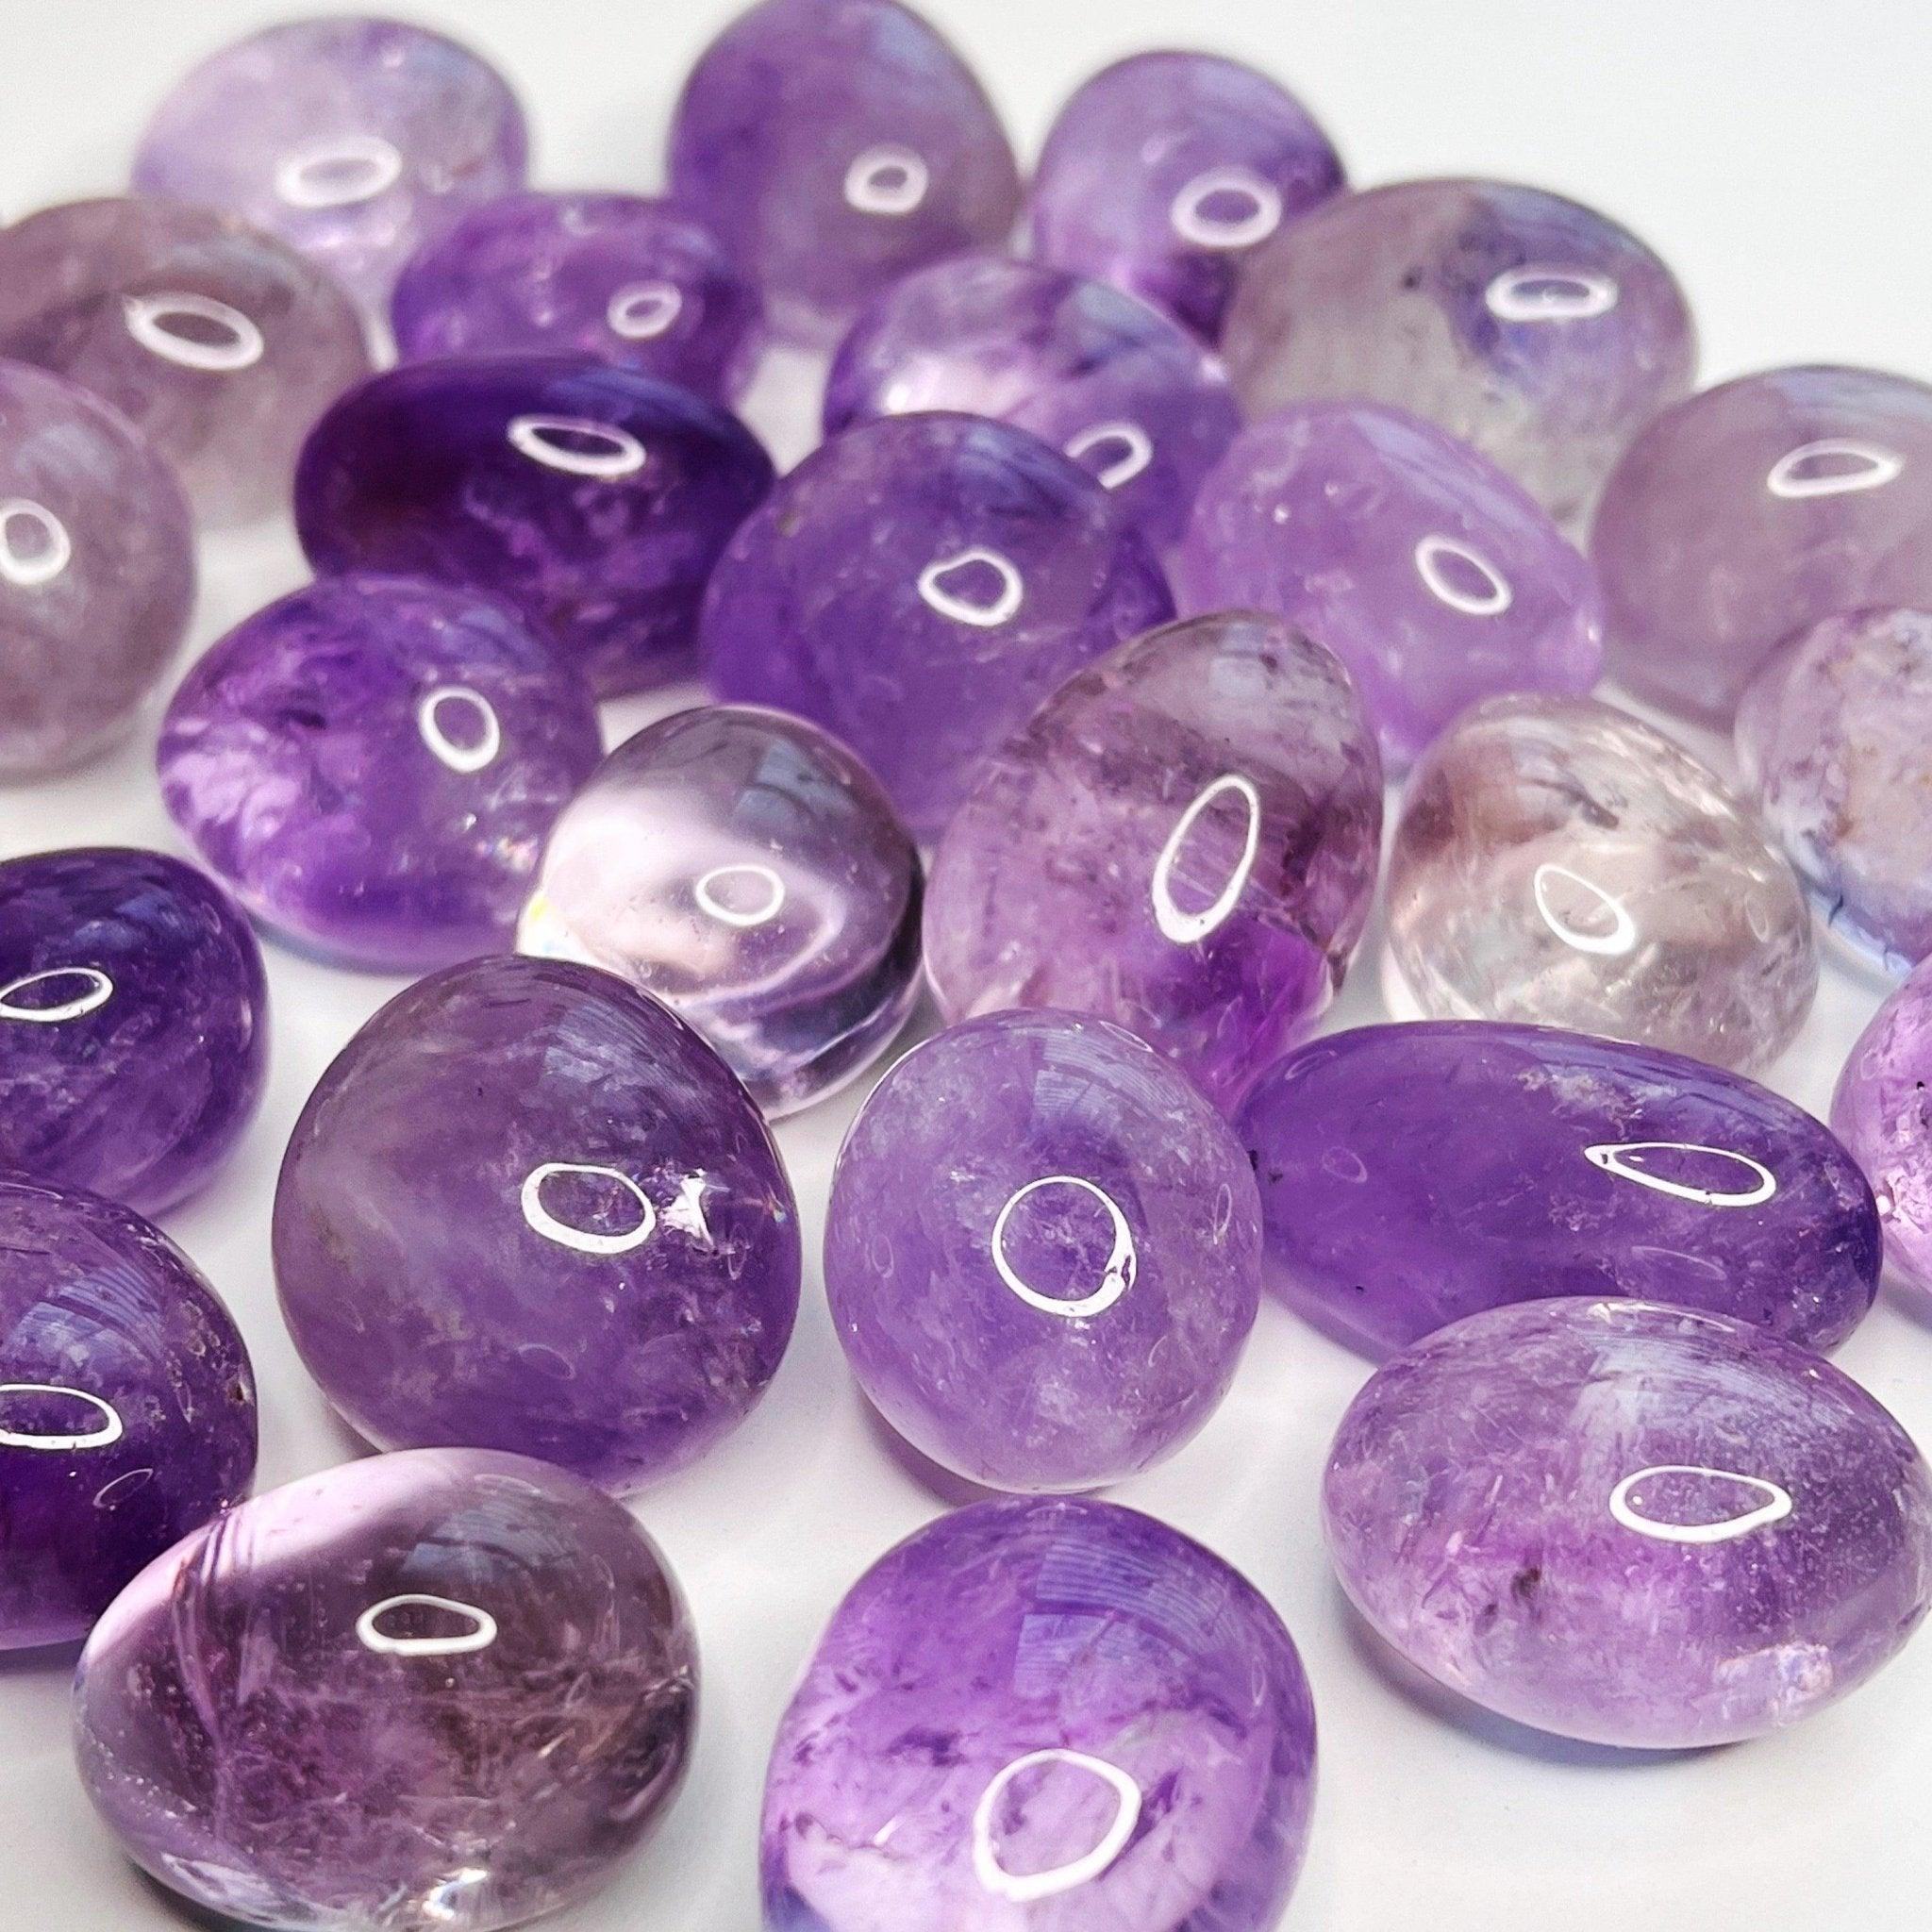 GEMMY AMETHYST CHONK - 33 bday, 444 sale, amethyst, bulk, chonky, emotional support, end of year sale, gemmy amethyst, grief gift bundle, holiday sale, new year sale, pocket crystal, pocket stone, protection gift bundle, spring equinox, tumble, valentine&#39;s day - The Mineral Maven